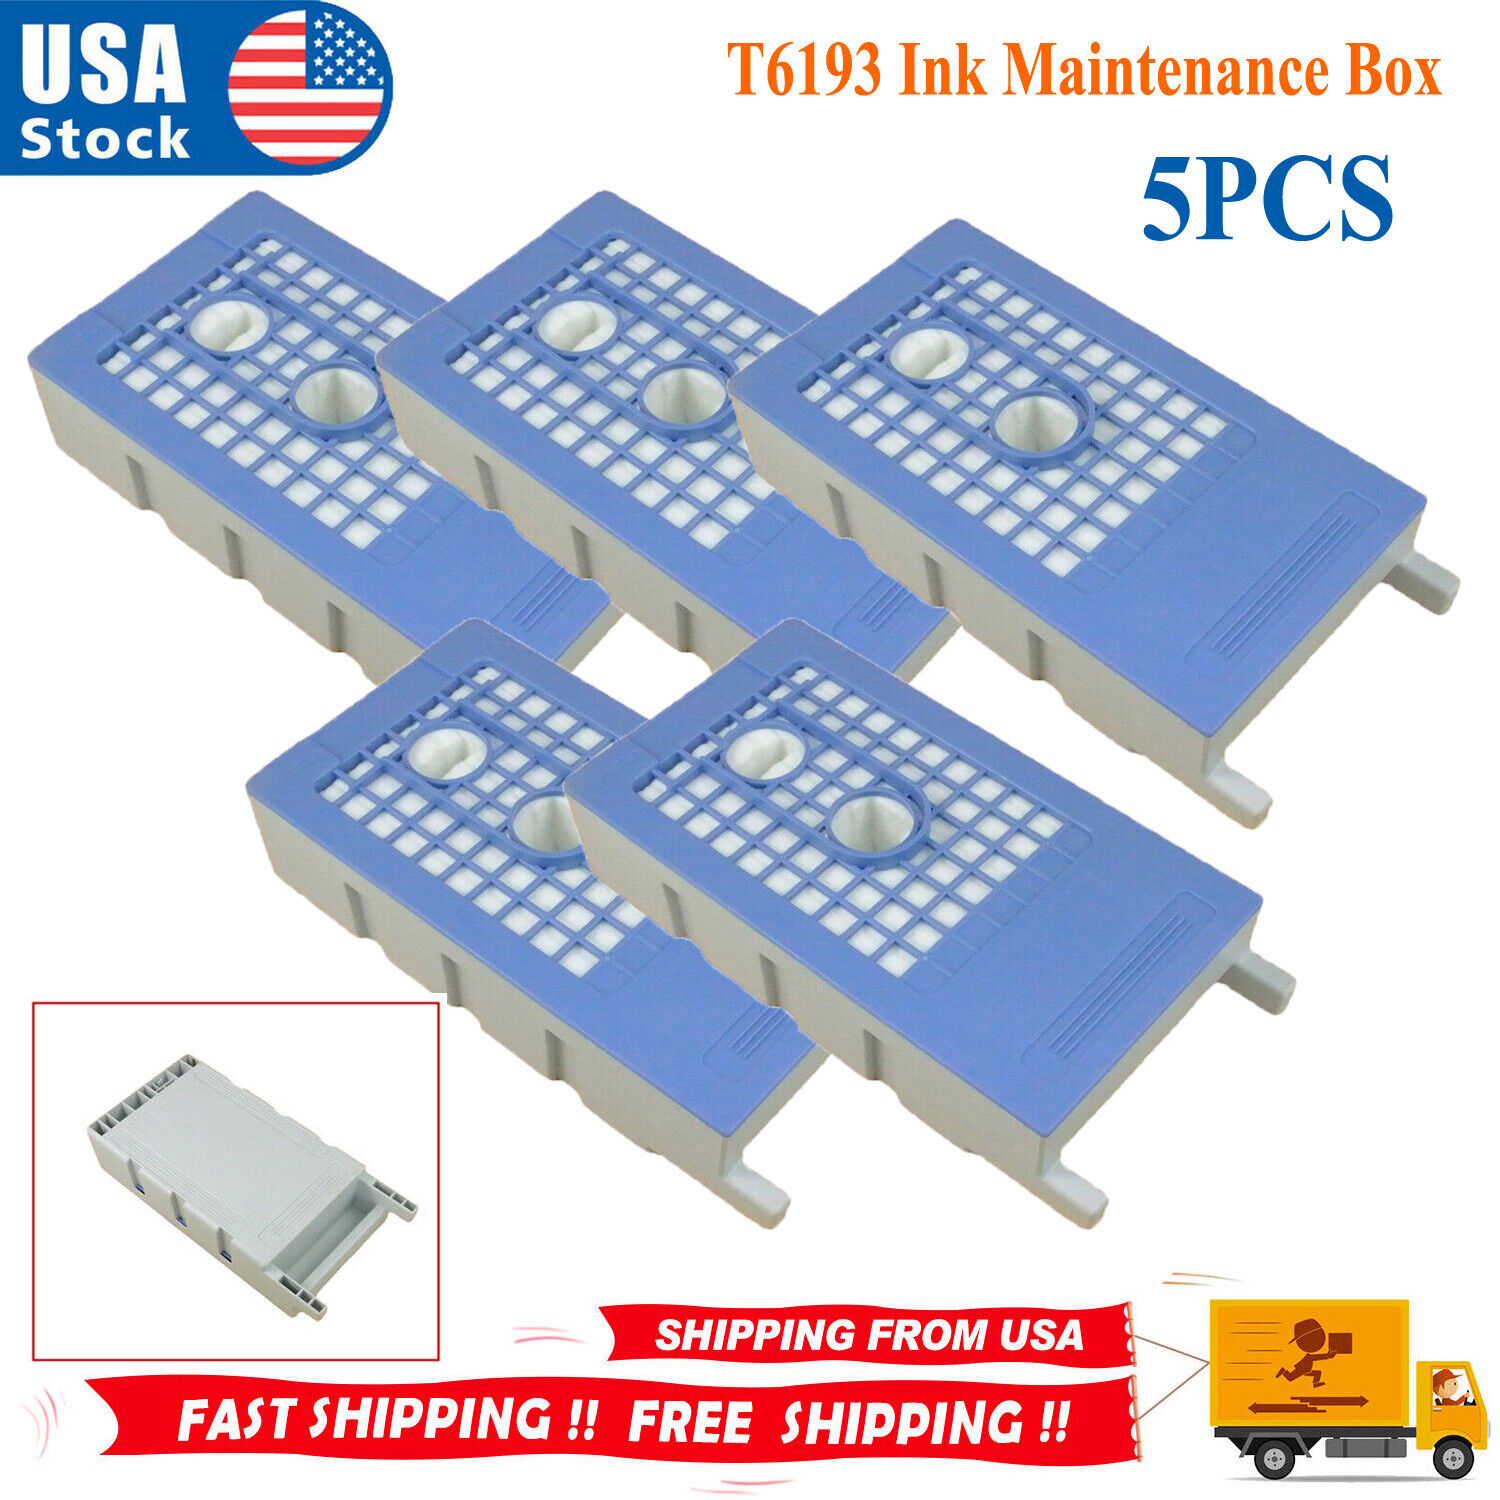 5PCS T6193 Ink Maintenance Box Waste Ink Tank For T5270 T7270 T3000 T5000 T7000